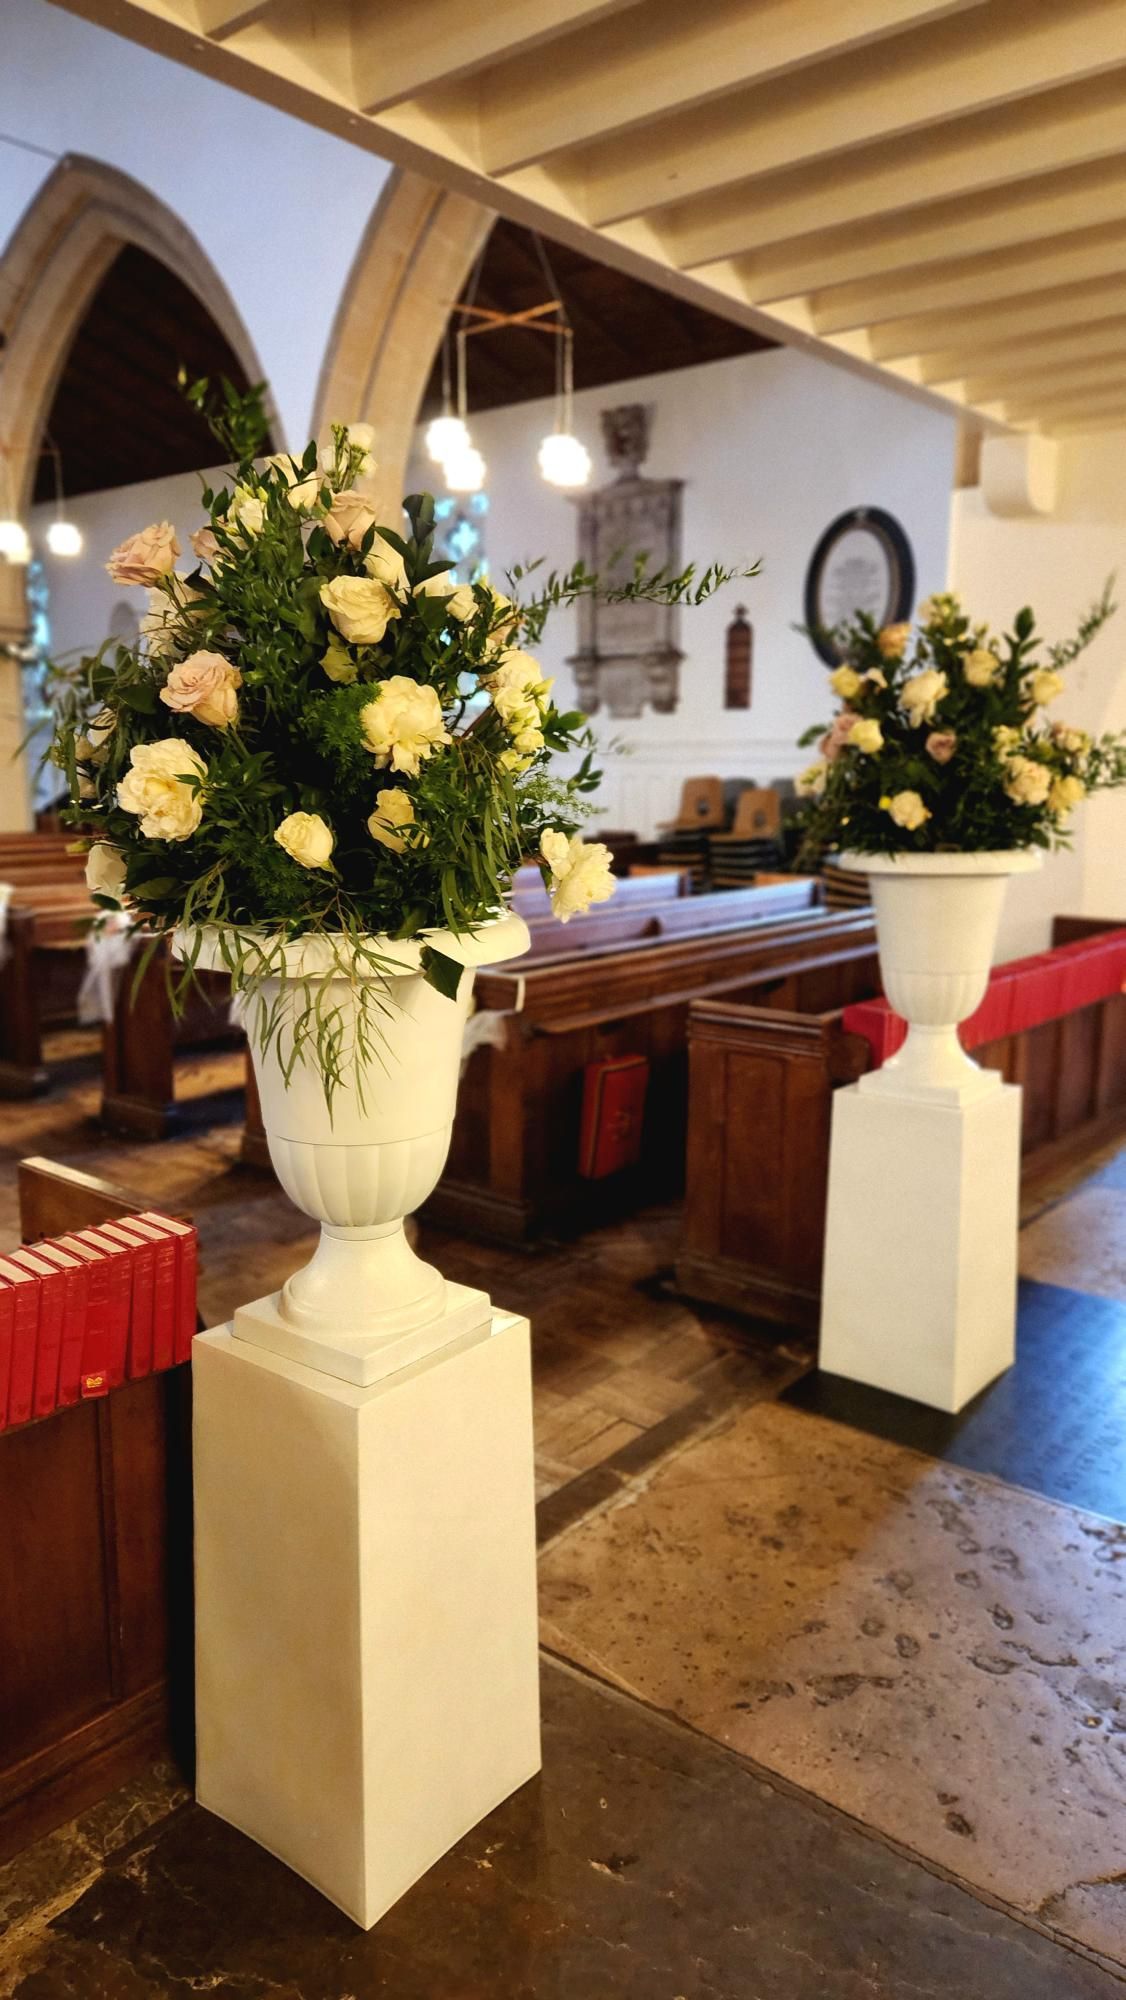 Pedestal flowers with fresh white roses